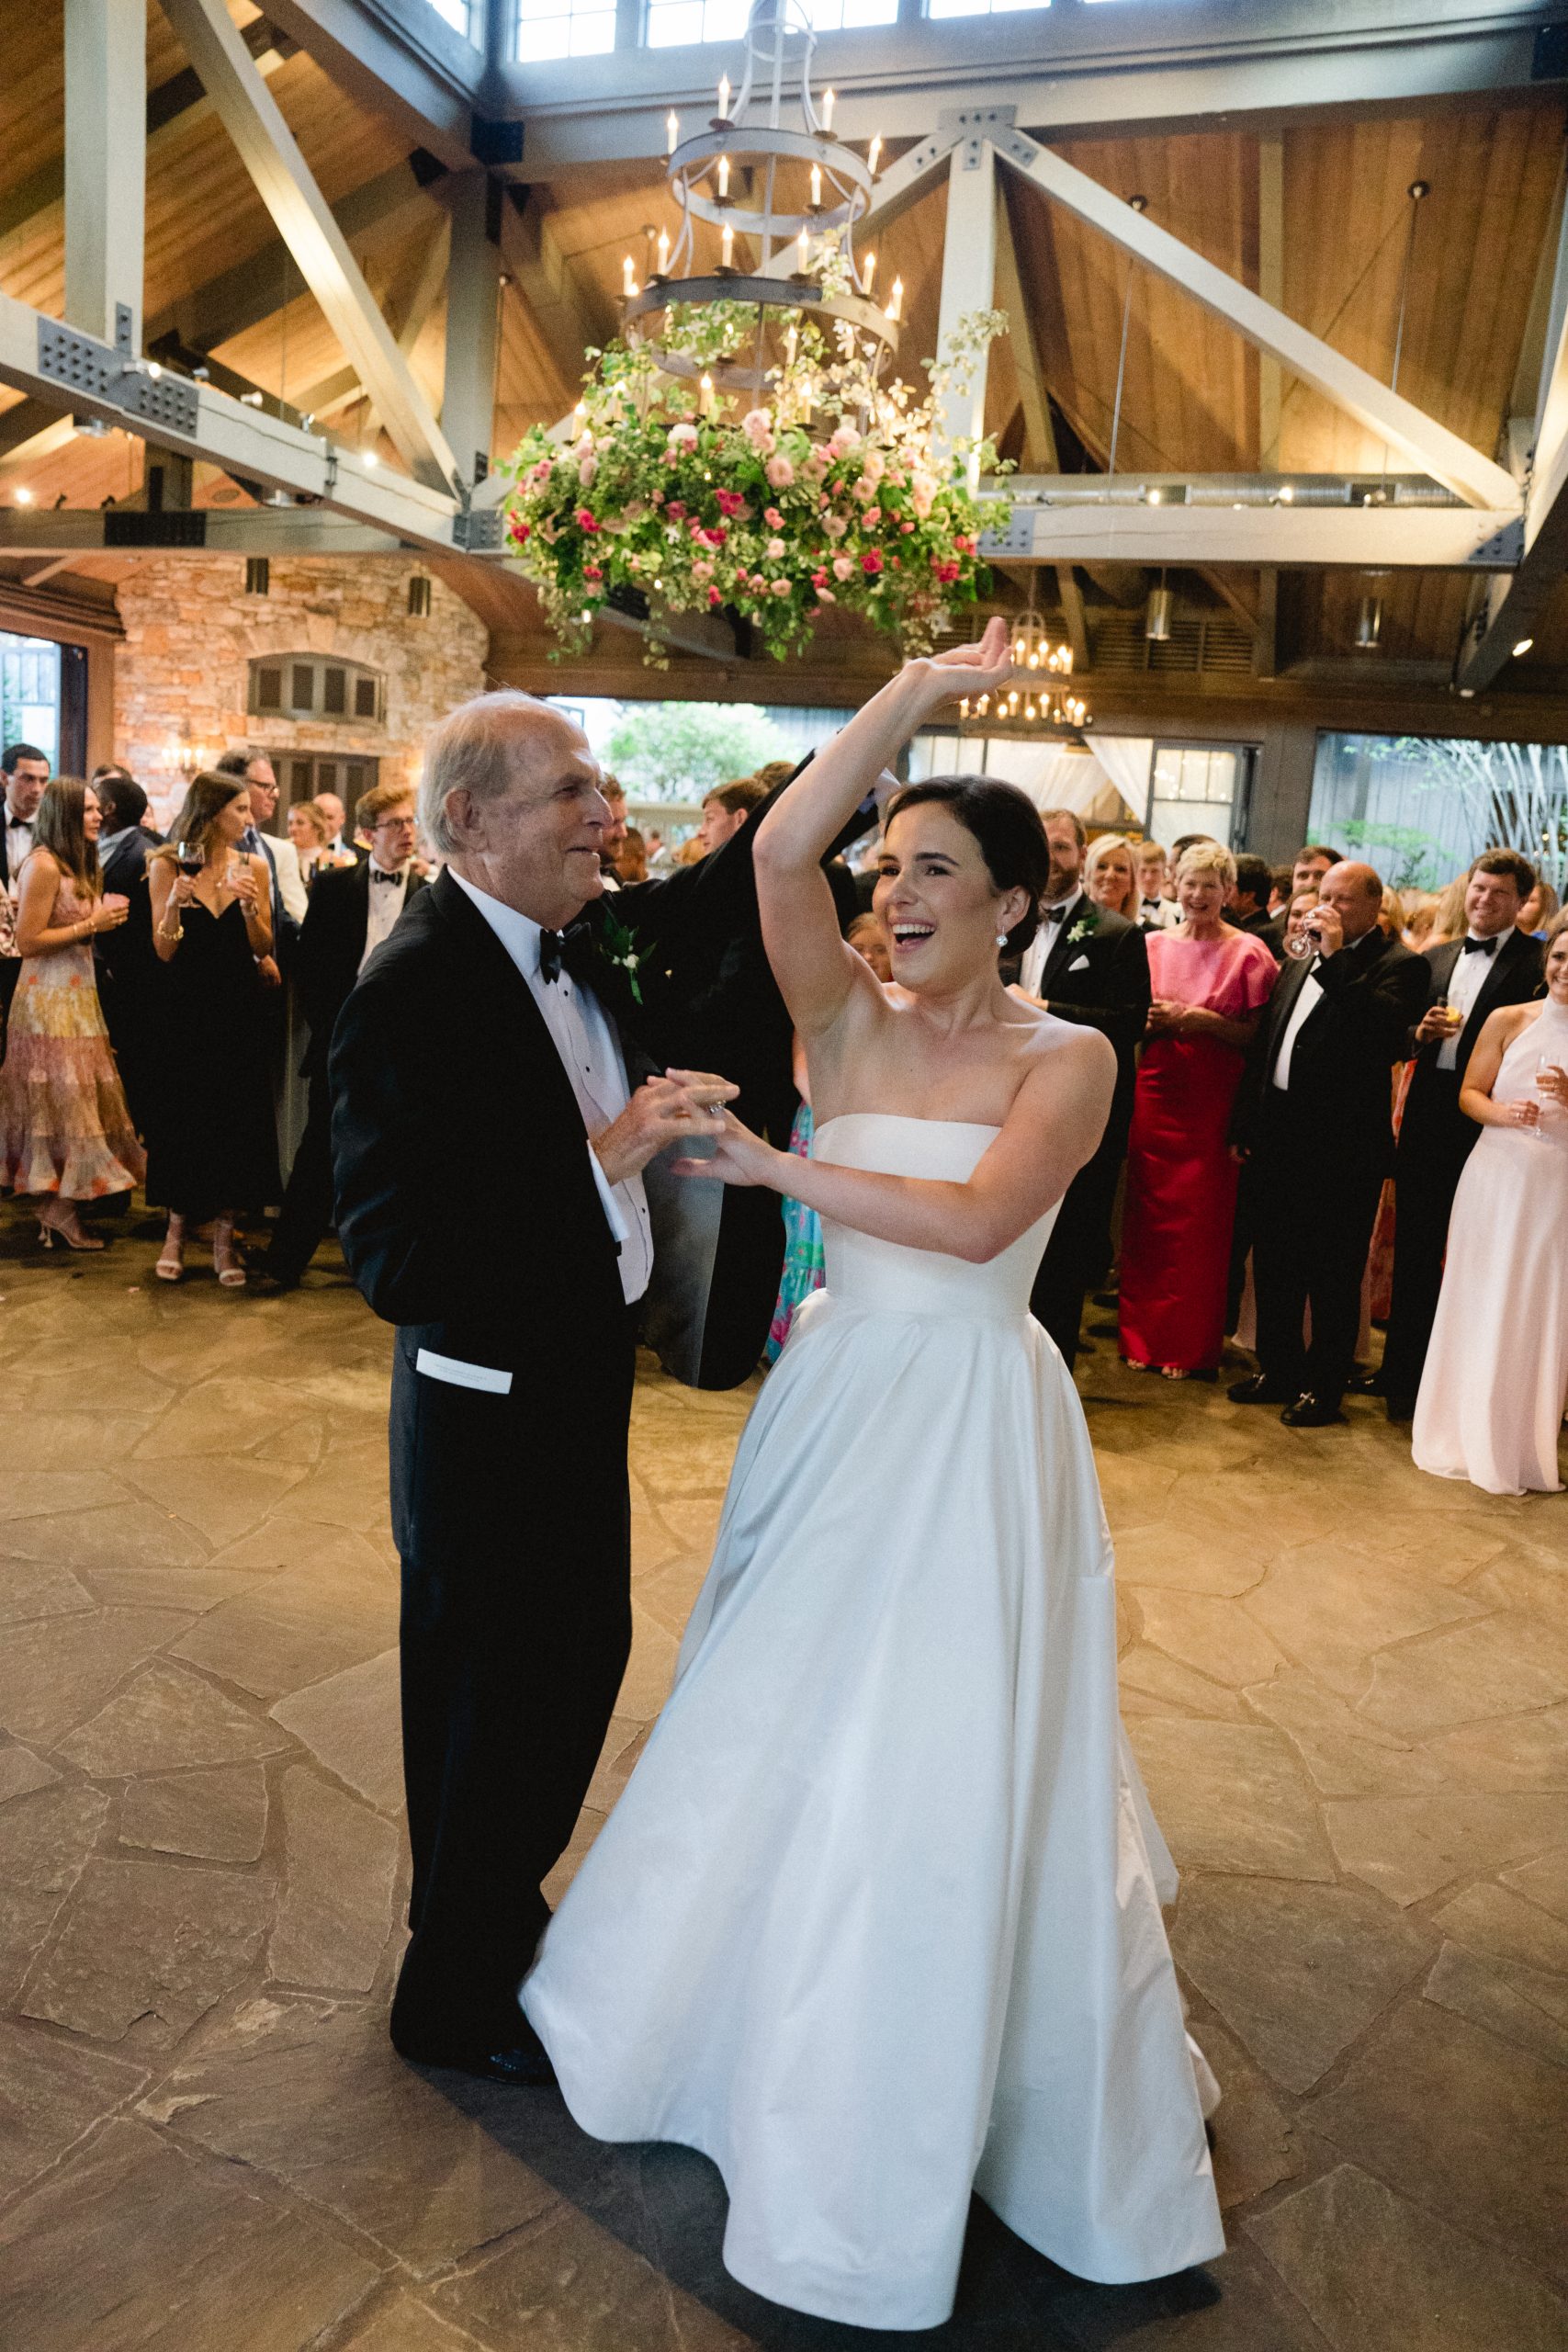 The reception venue was The Farm at Old Edwards Inn. Olivia and her grandfather, Arnold Schraibman, danced to How Sweet It Is by James Taylor.  
